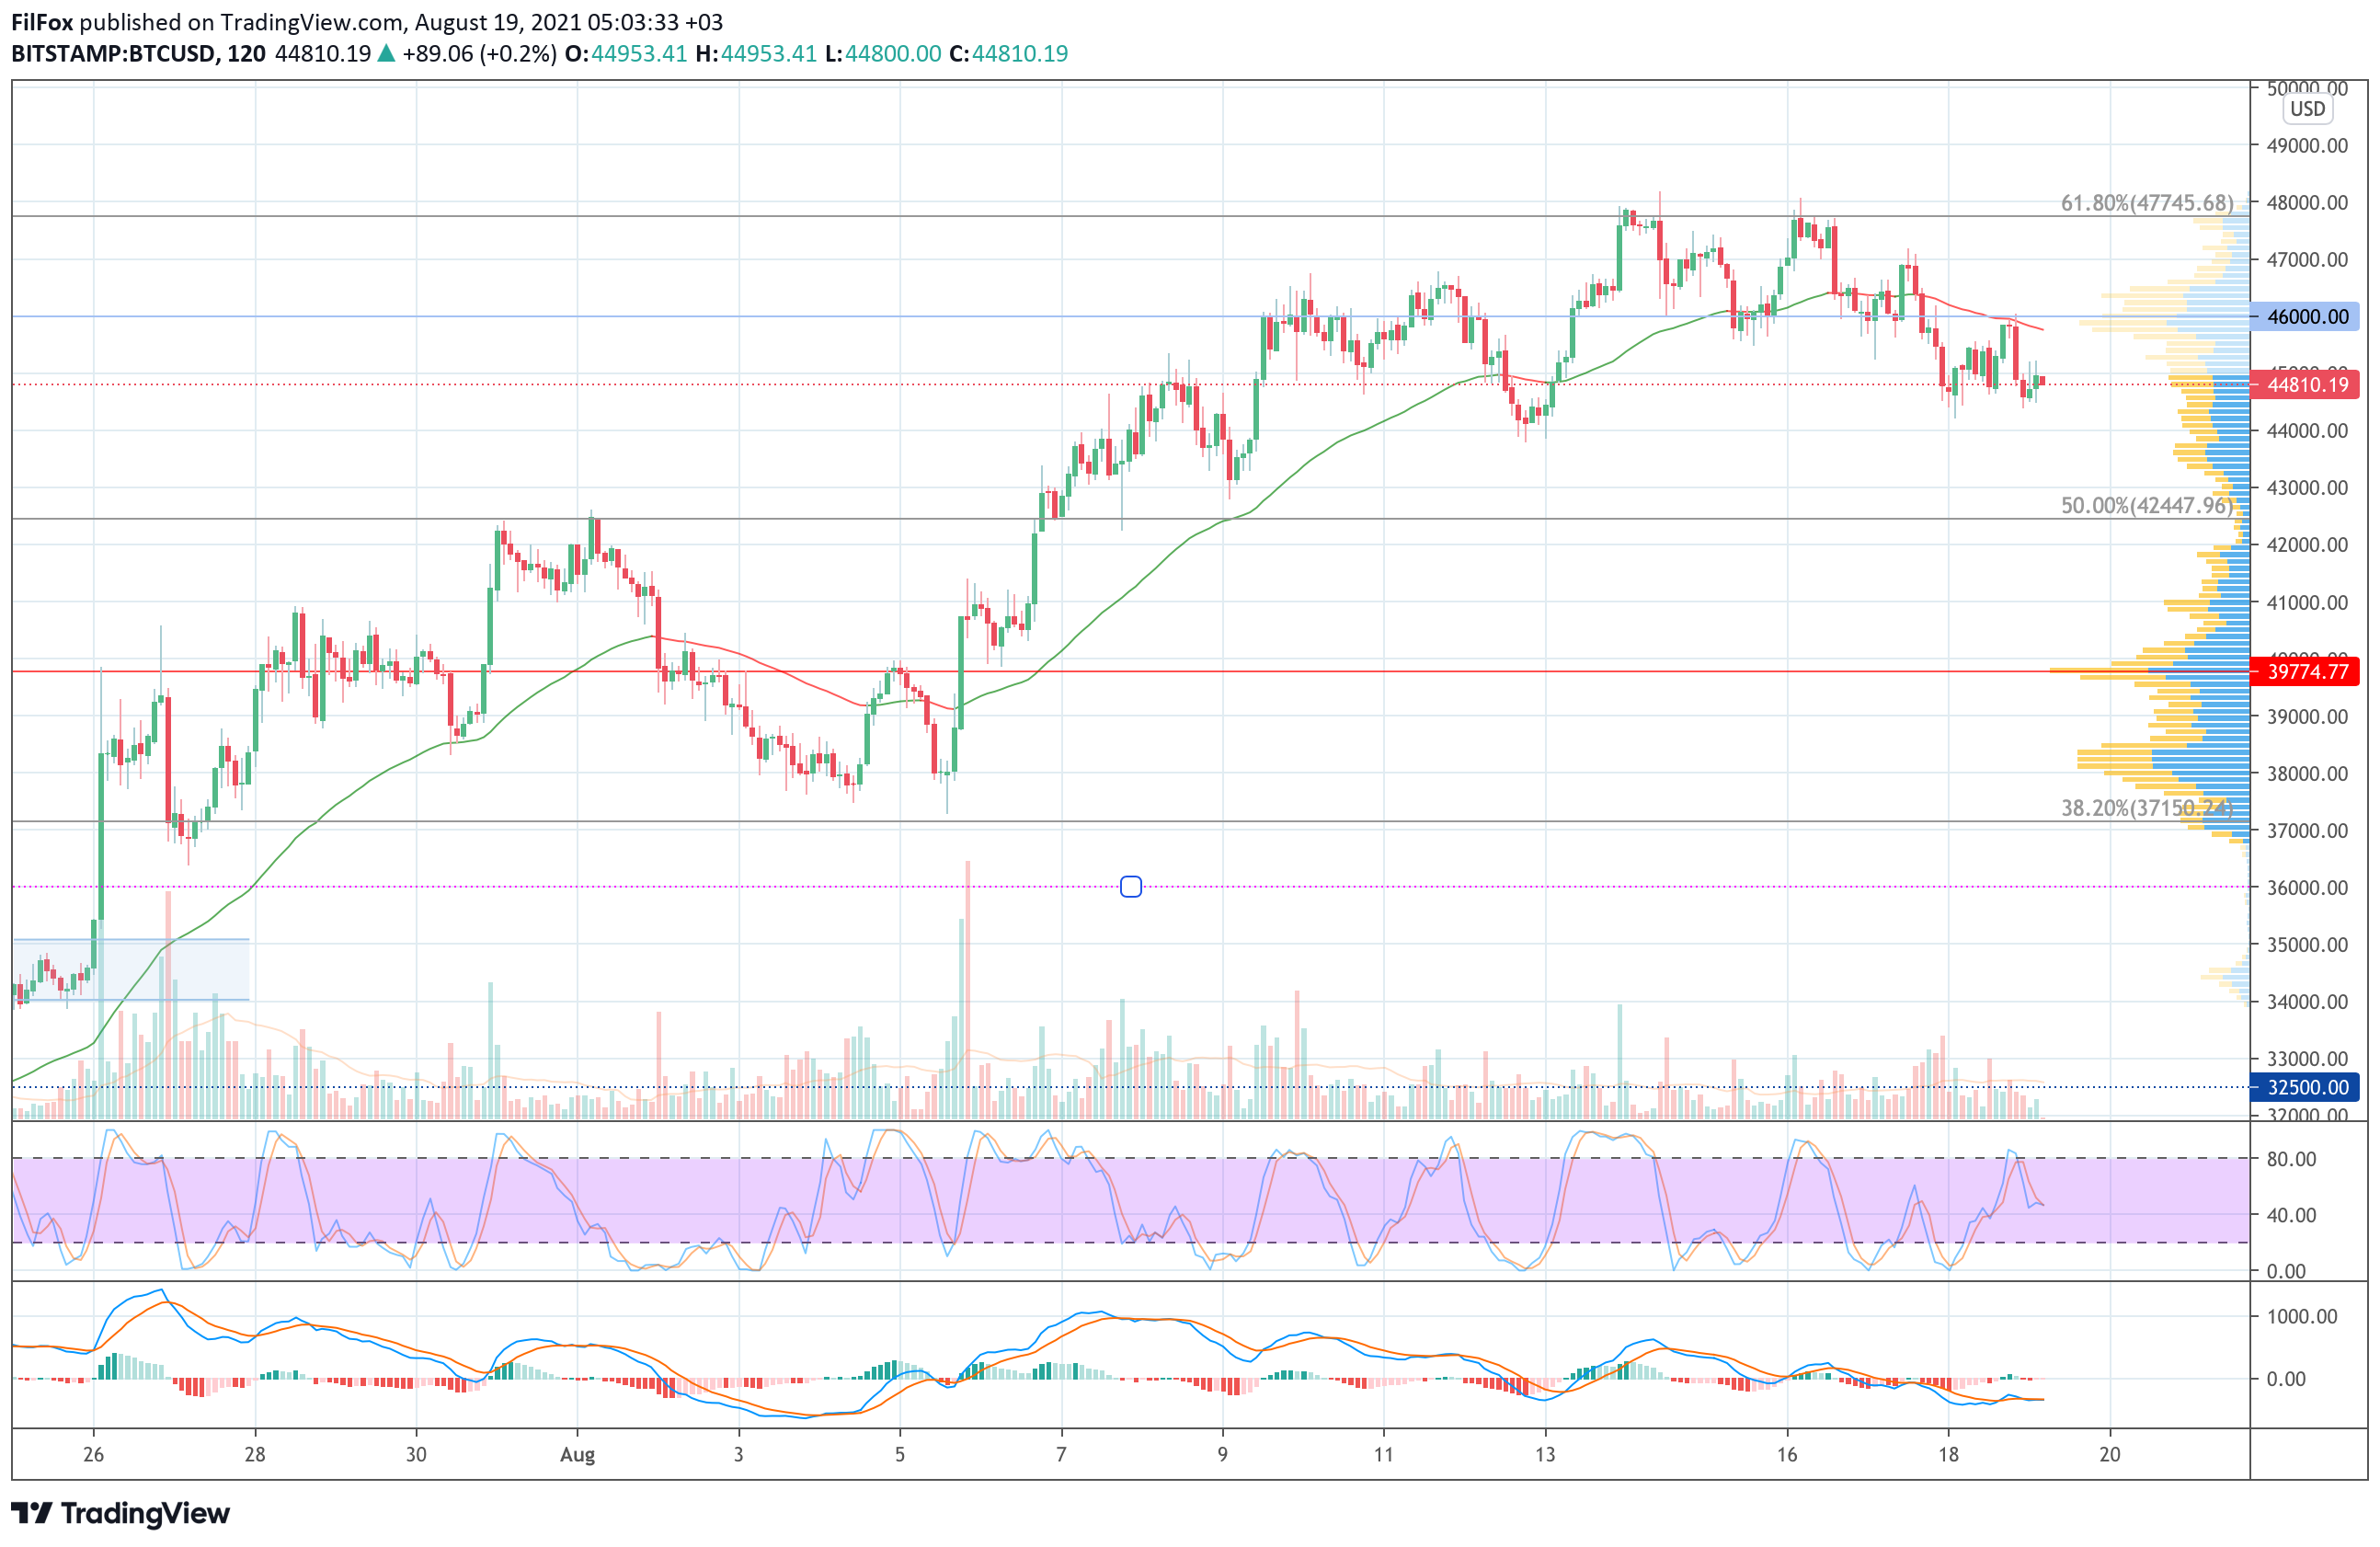 Analysis of the prices of Bitcoin, Ethereum, XRP for 08/19/2021